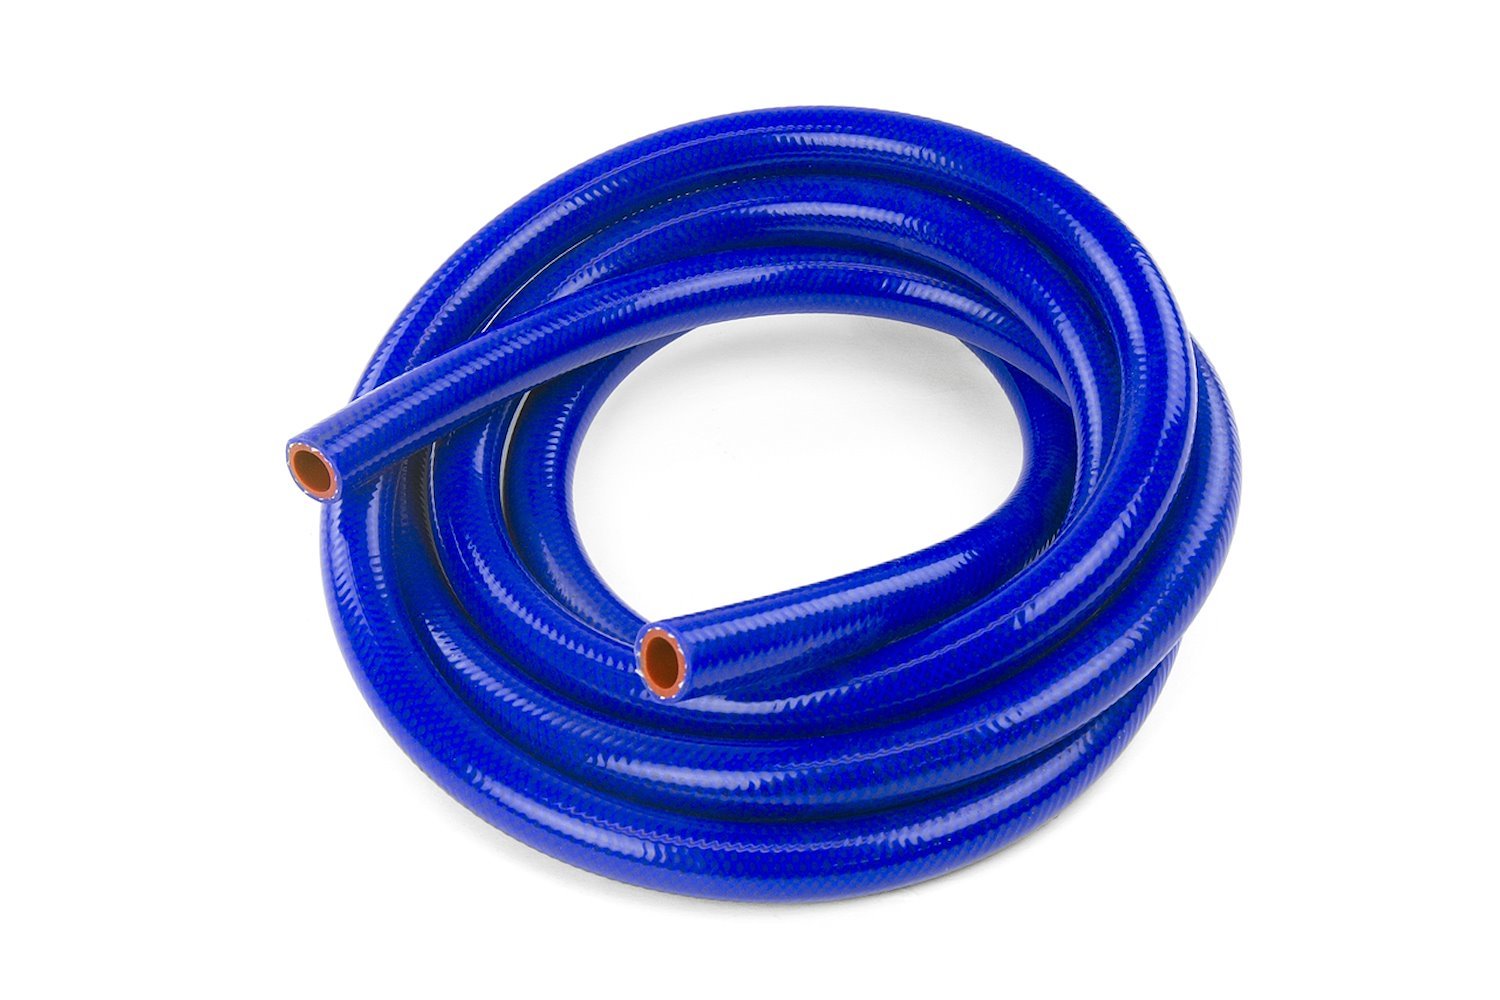 HTHH-050-BLUEx10 Silicone Heater Hose Tubing, High-Temp 1-Ply Reinforced, 1/2 in. ID, 10 ft. Roll, Blue